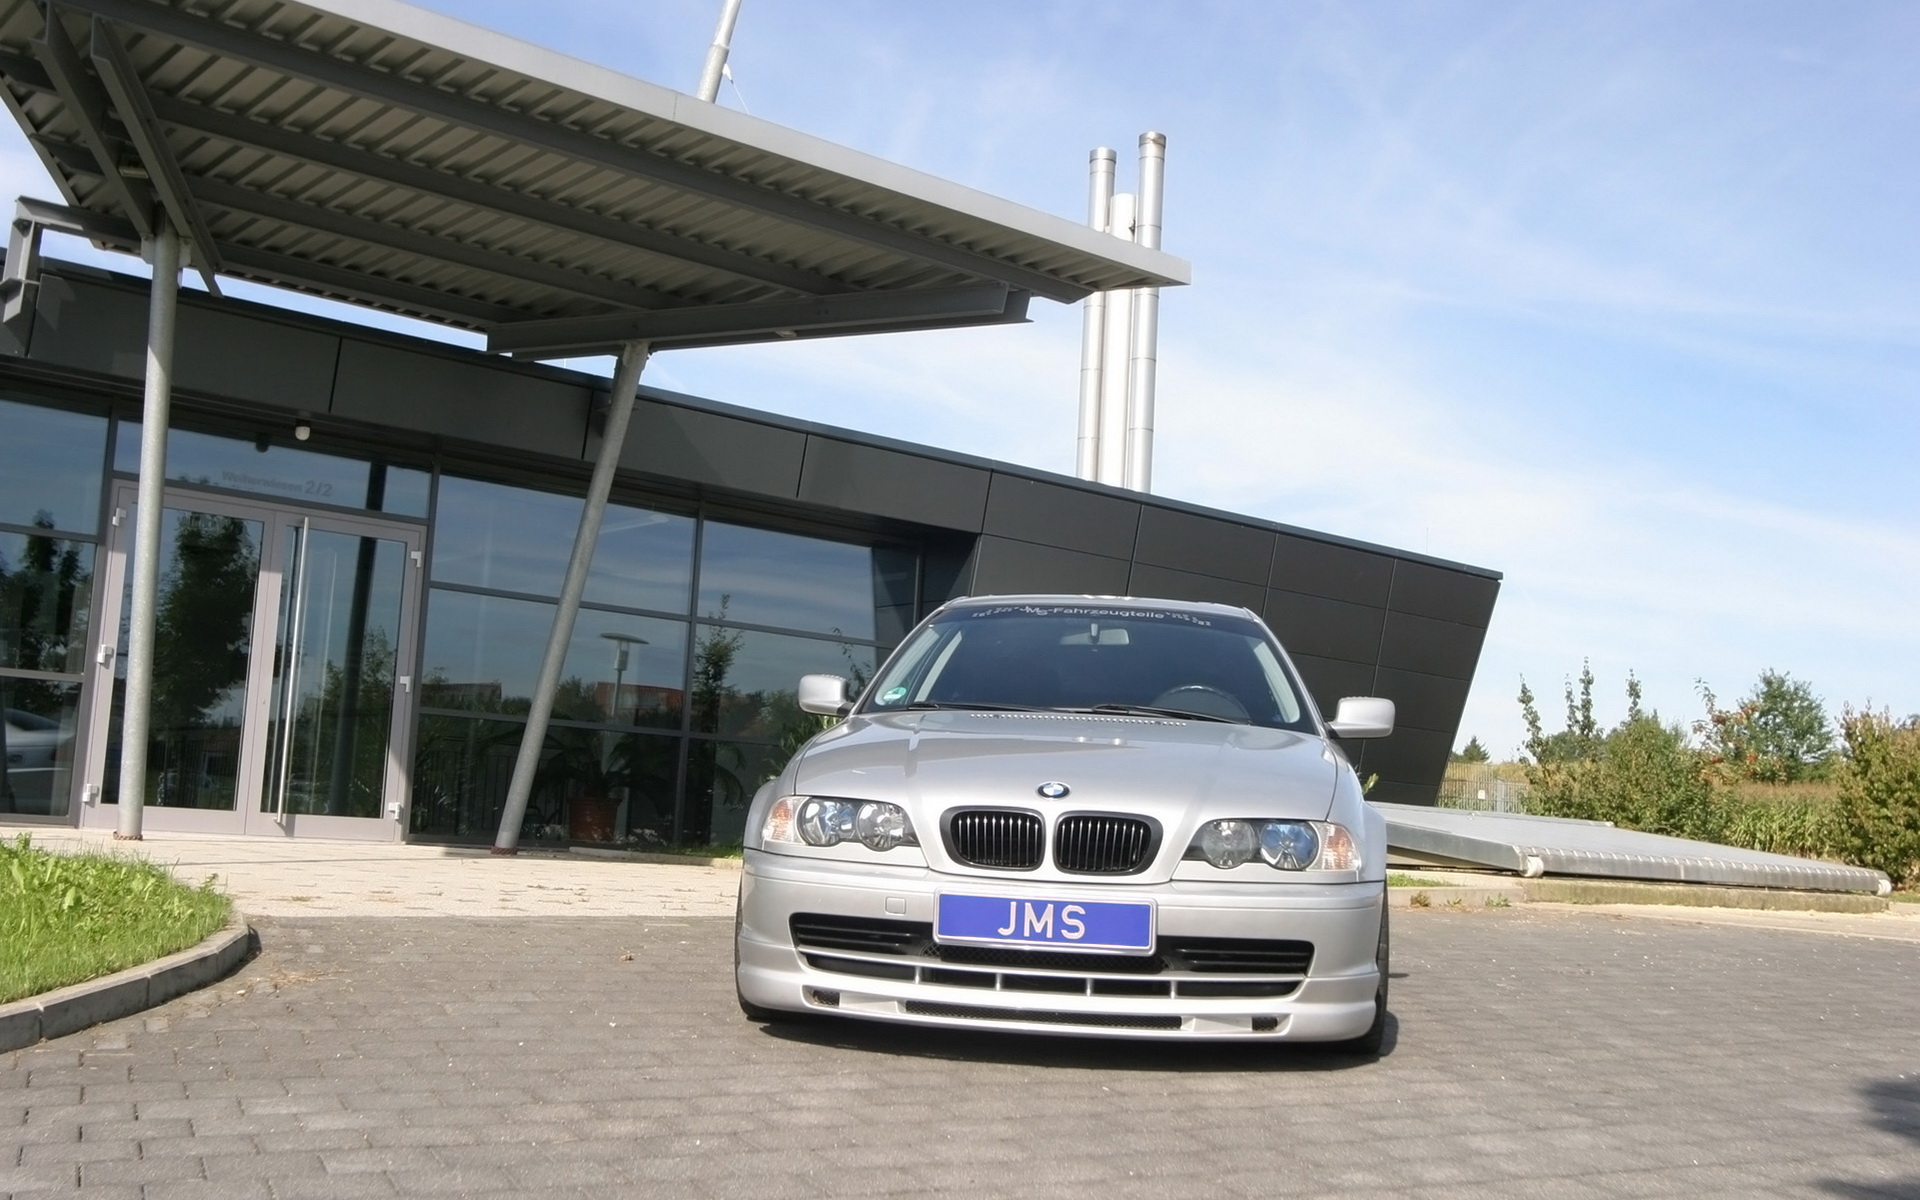 2011 JMS BMW E46 3 Series Wallpapers And images